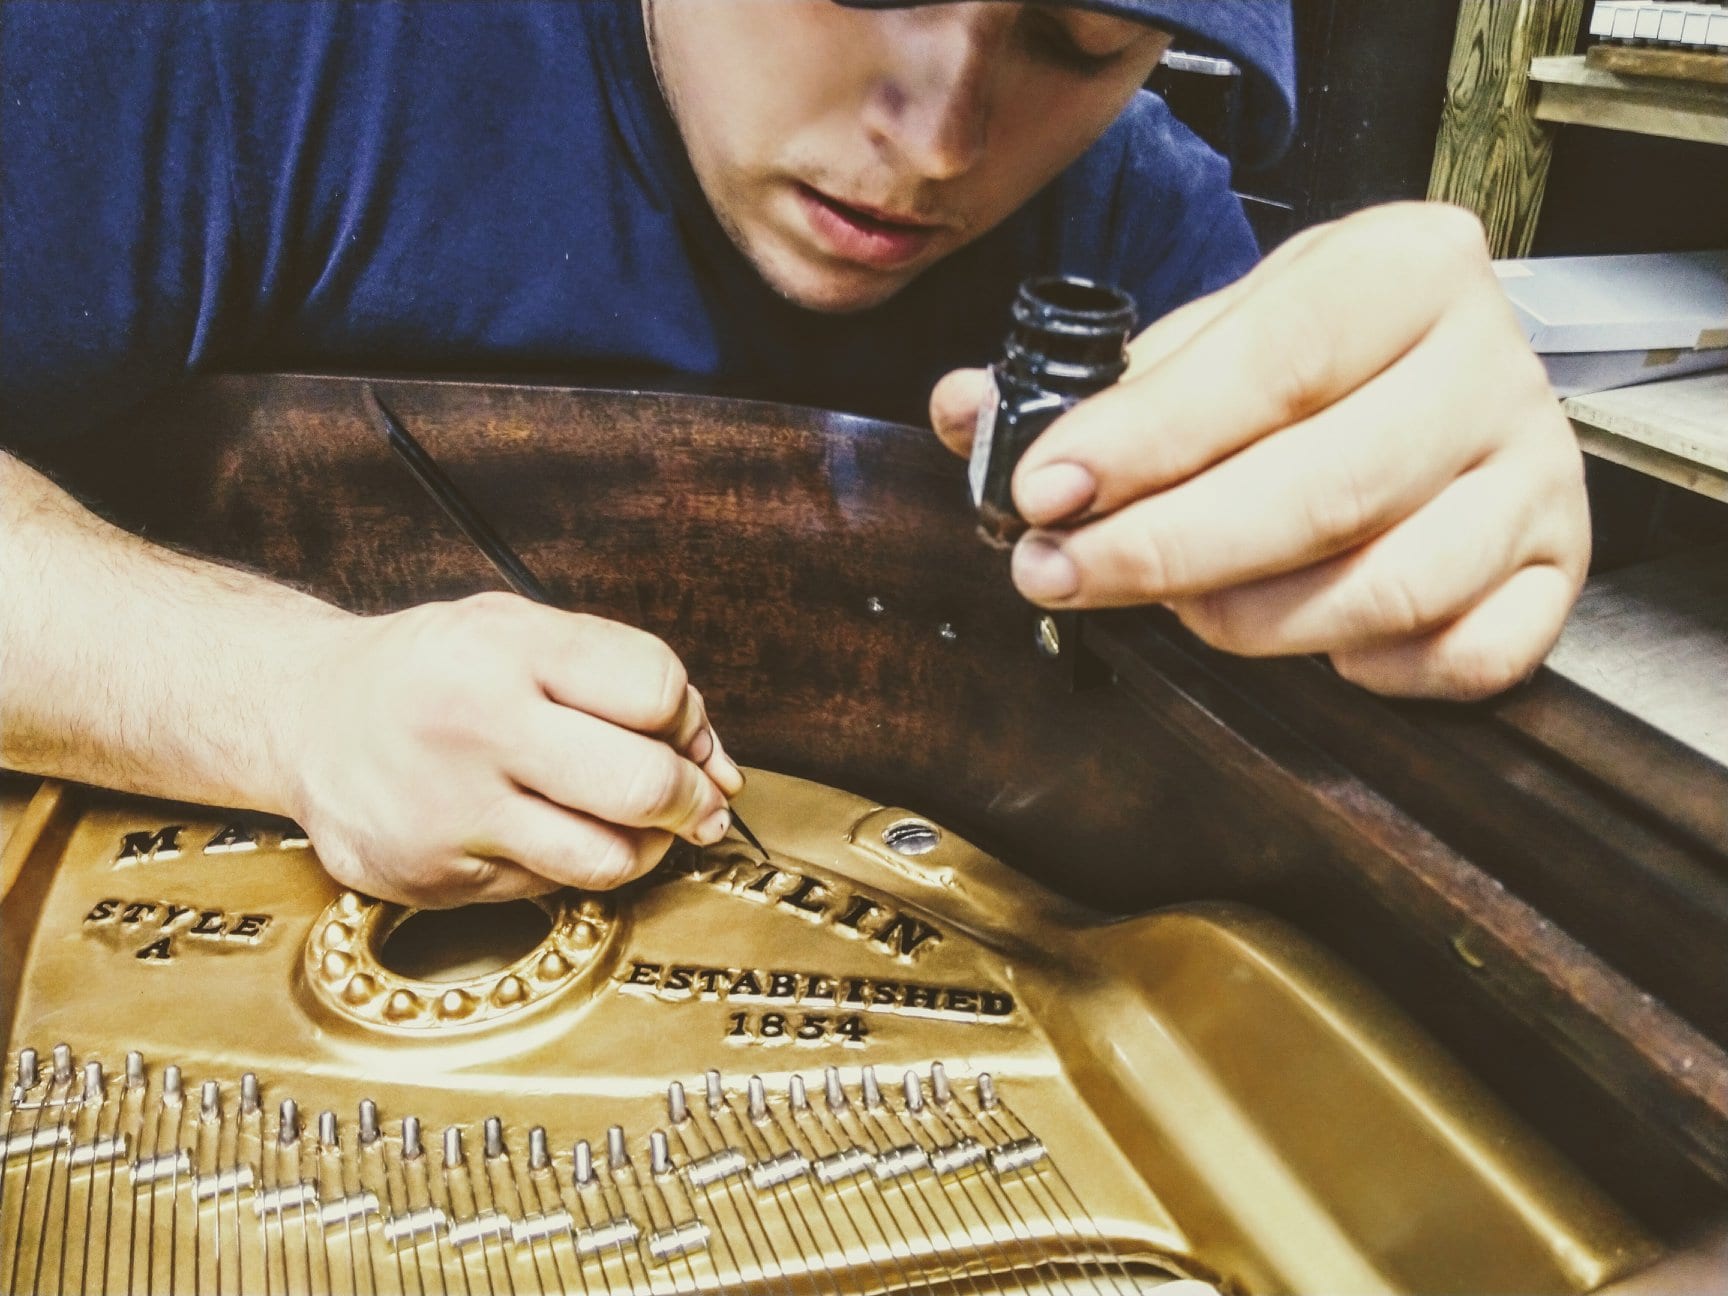 Employee completing Piano restoration at Gist